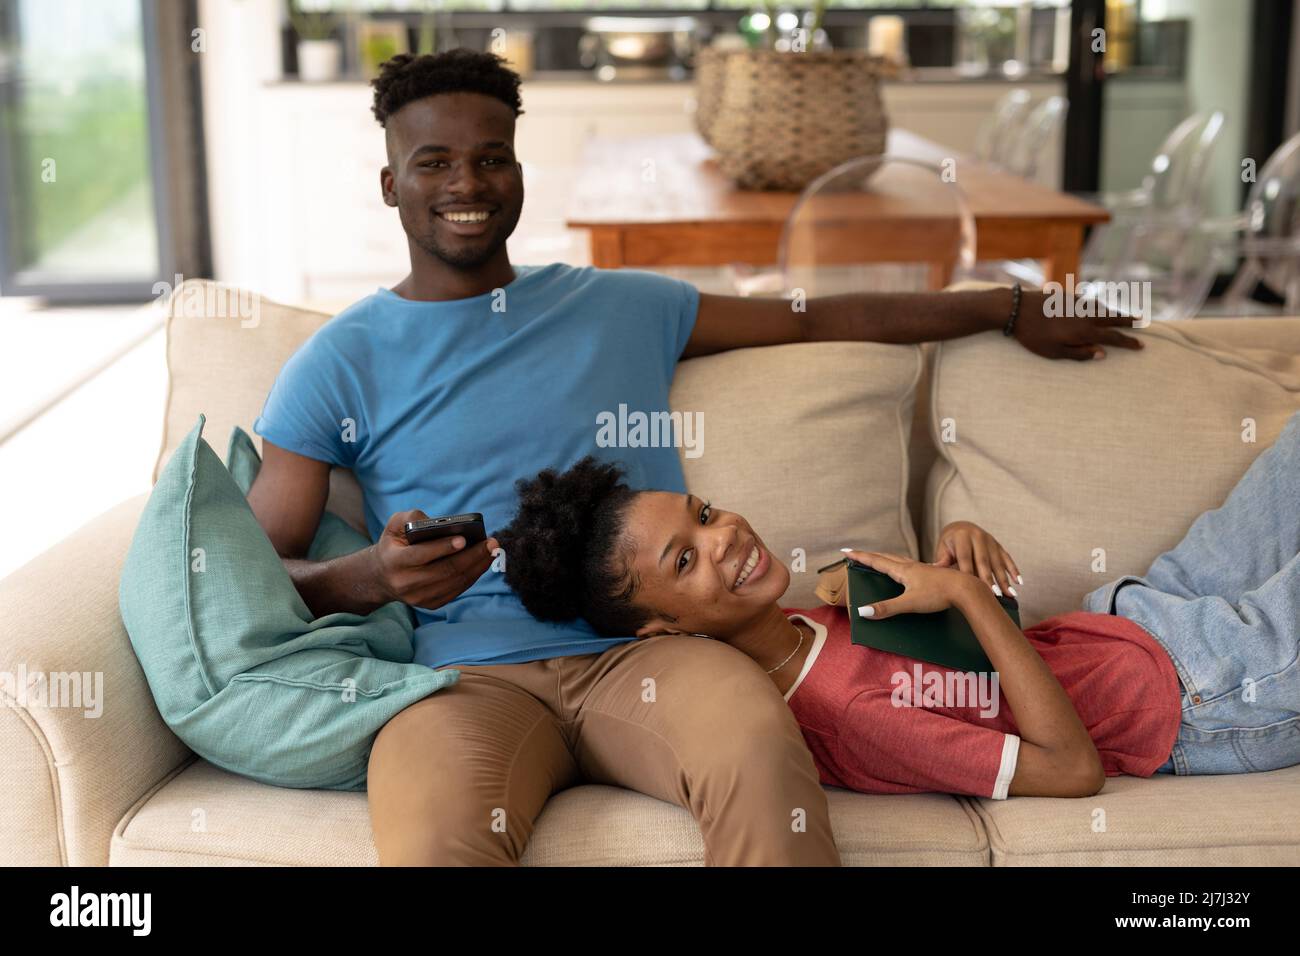 Smiling african american young woman with book lying on boyfriend's lap using smart phone on sofa Stock Photo